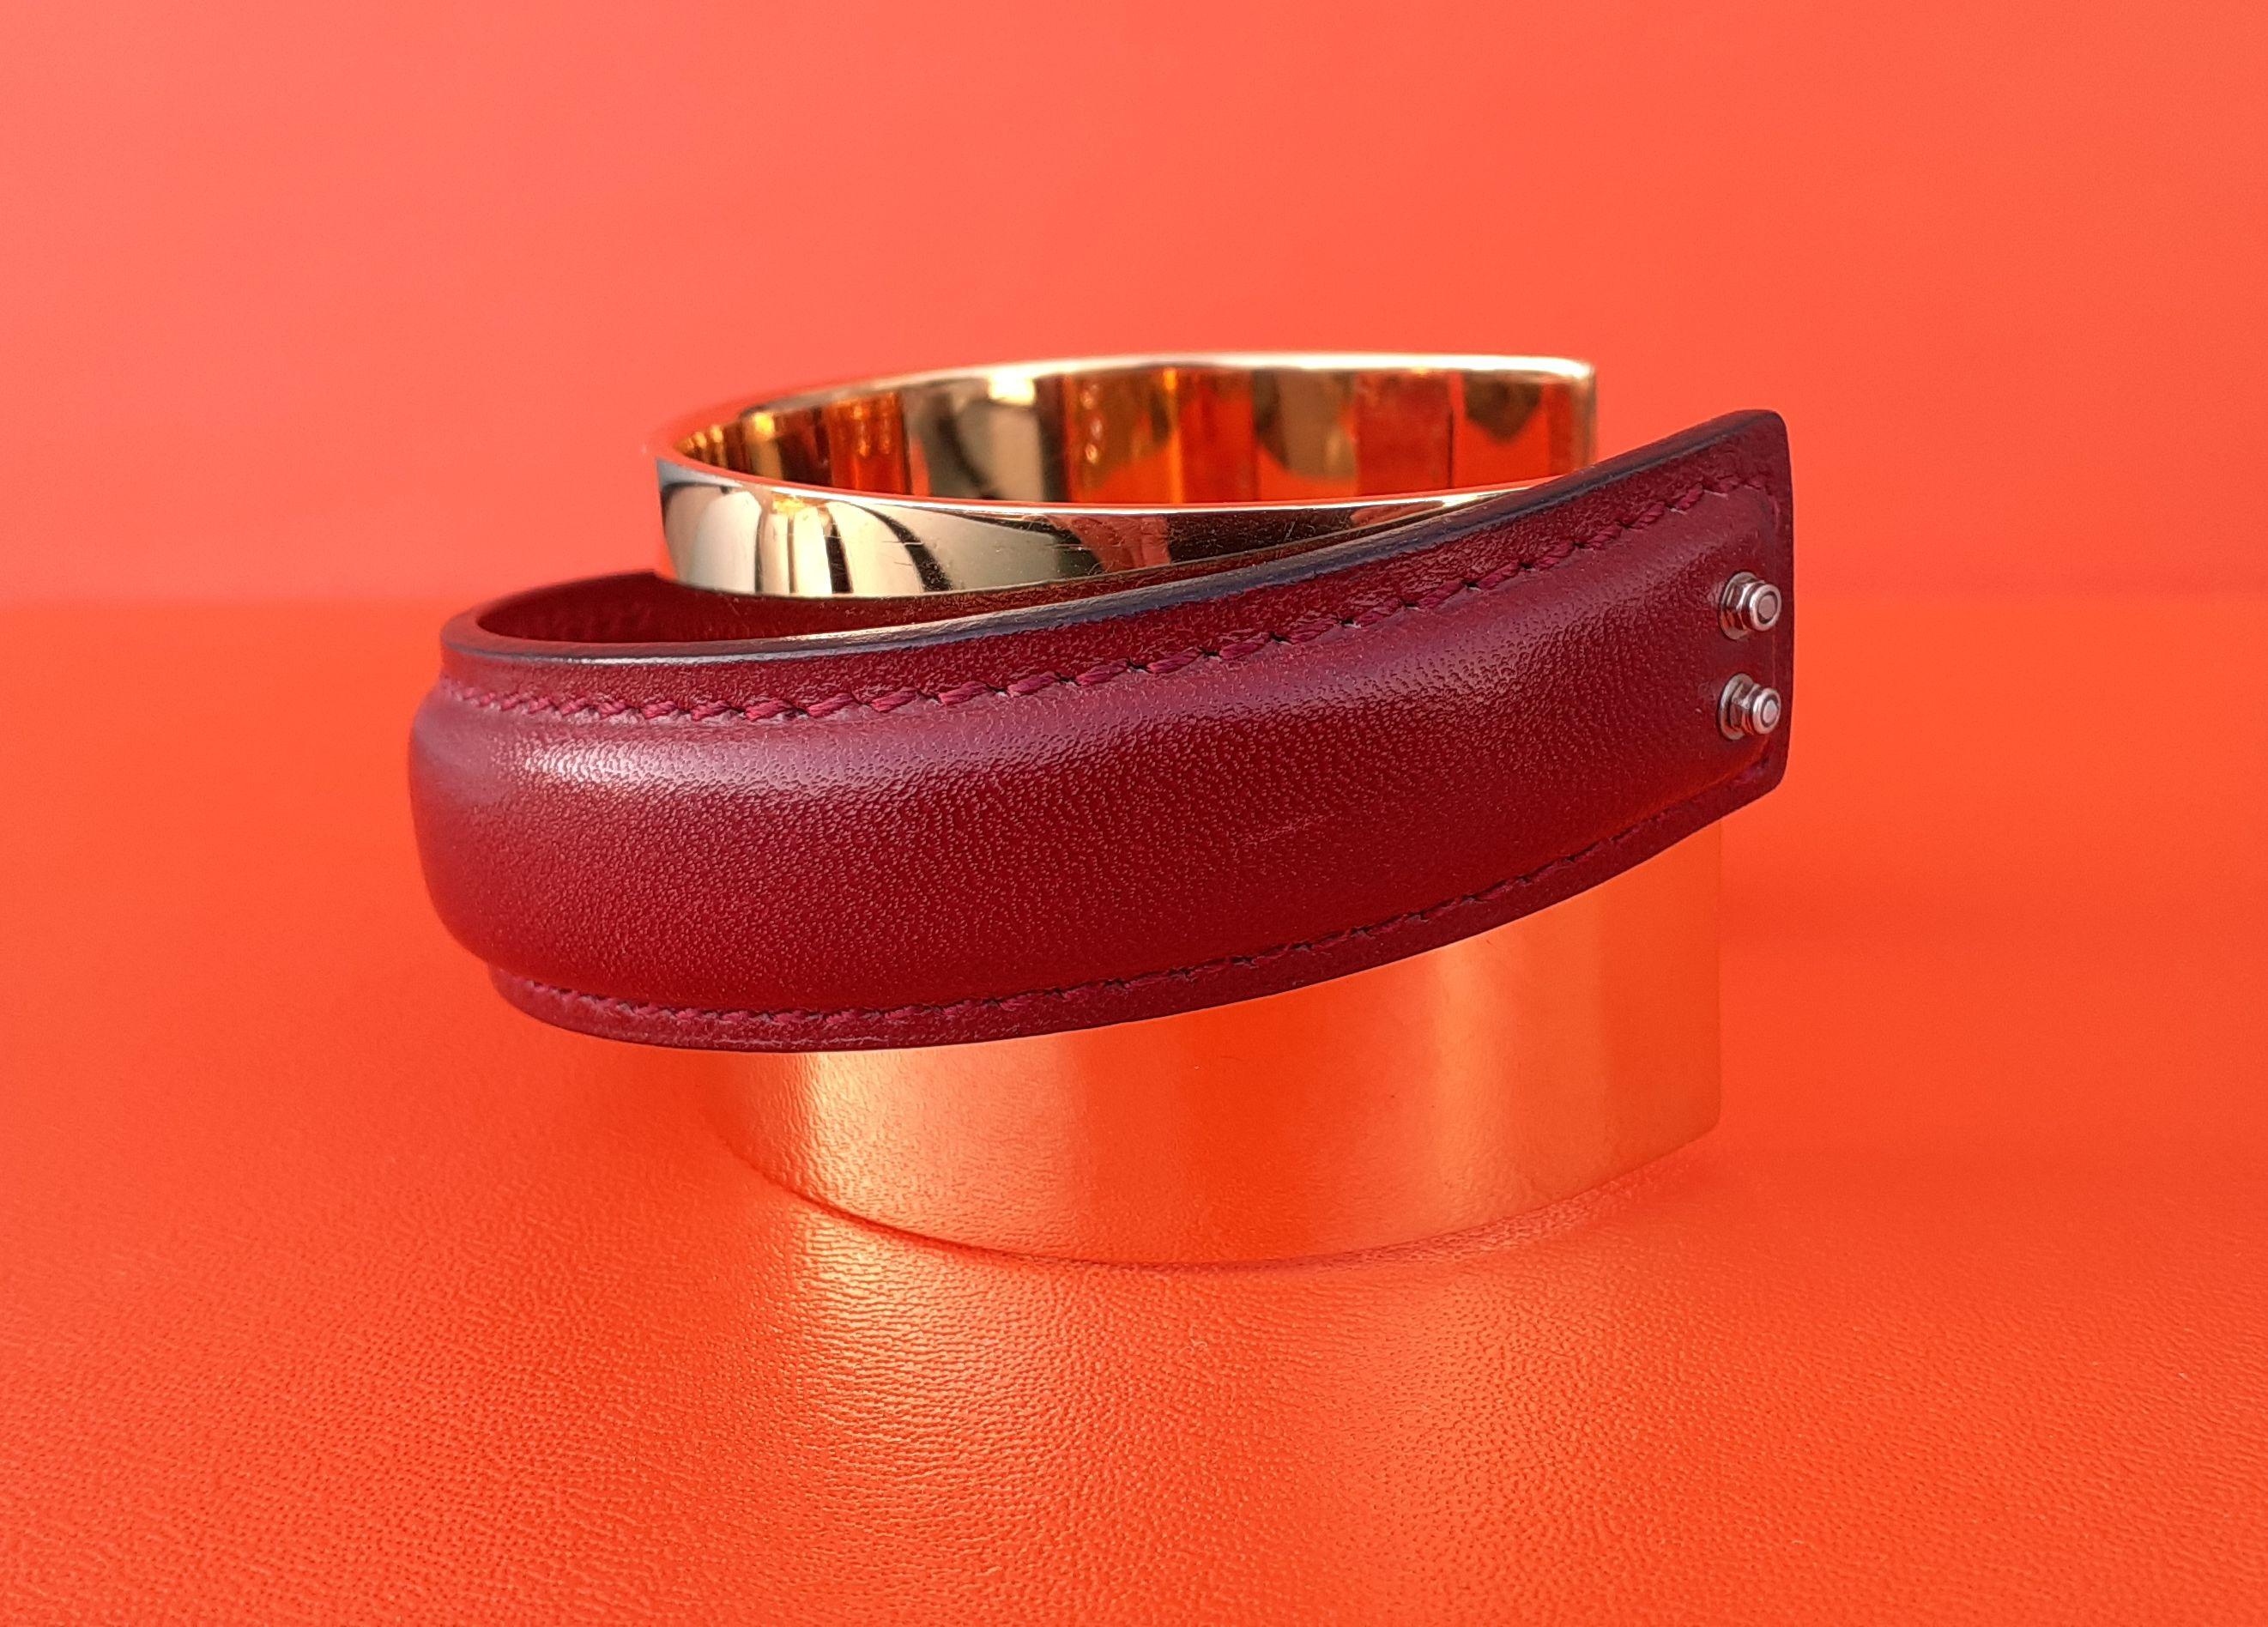 Women's Exceptional Hermès Cuff Bracelet Golden Hdw and Rouge H Box Leather Size L For Sale